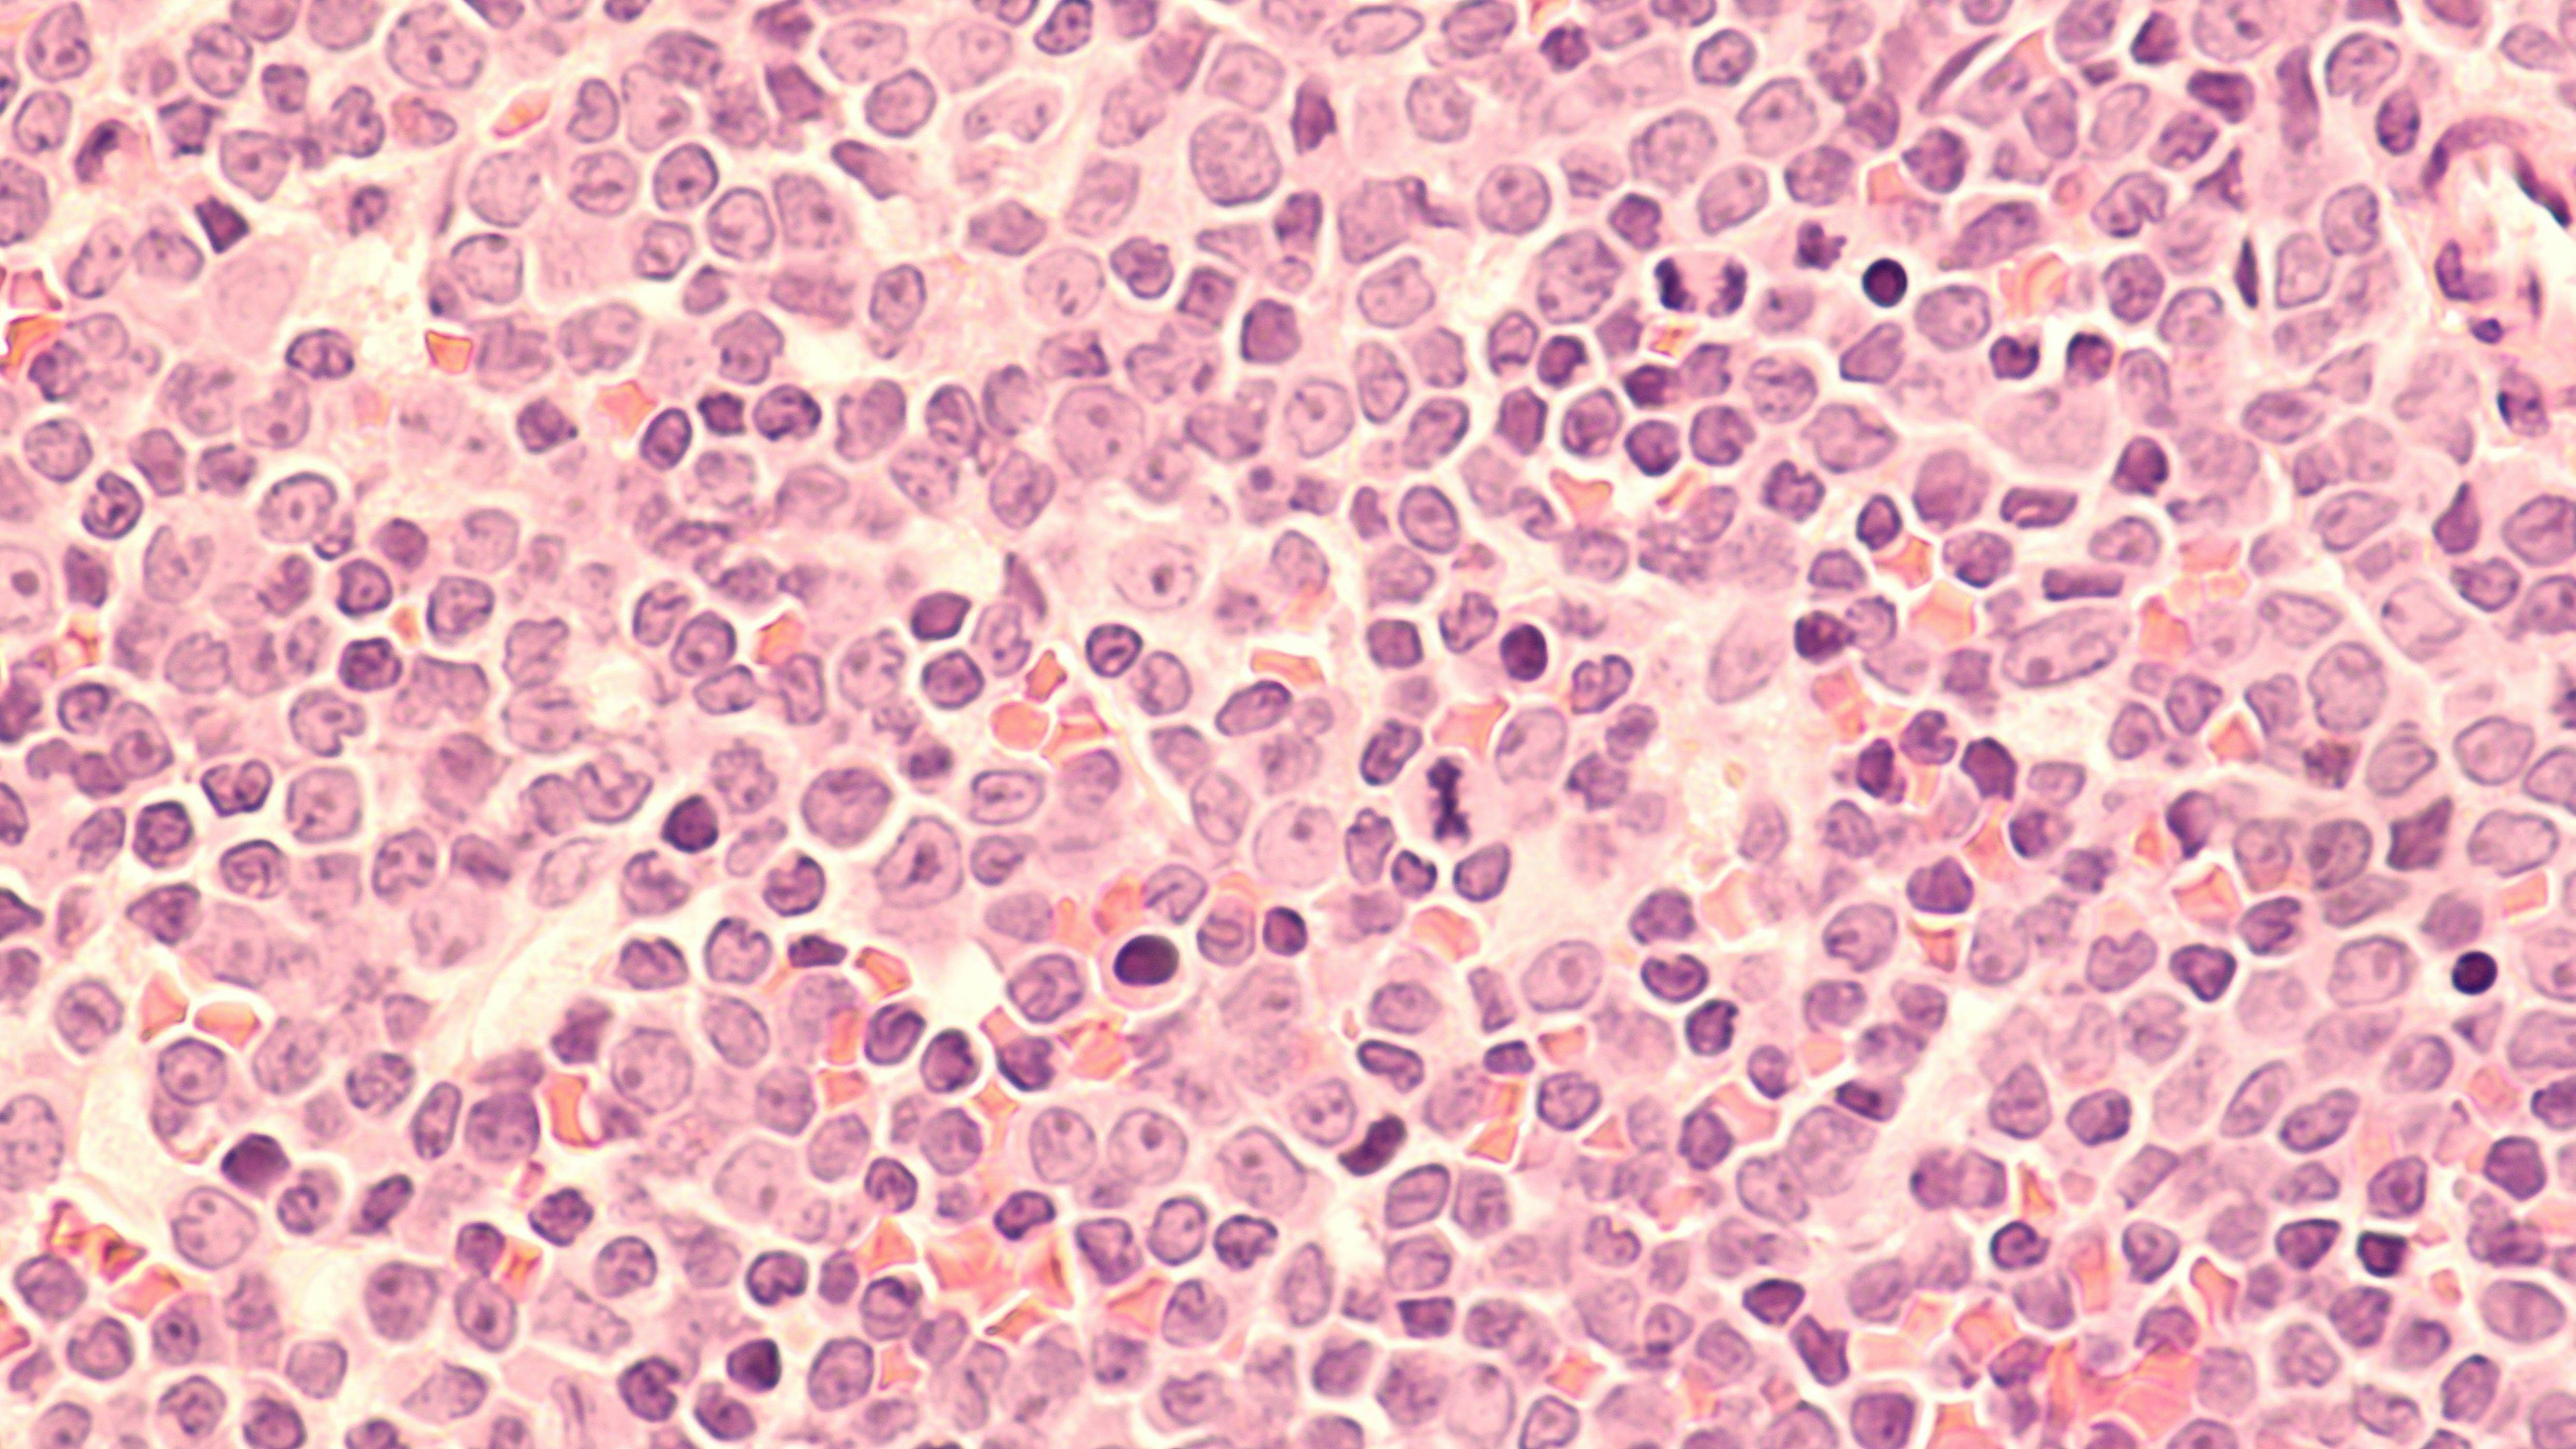 A staging bone marrow biopsy shows replacement of normal elements by diffuse large B-cell lymphoma, a type of non Hodgkin lymphoma, a malignancy (cancer) of lymphocytes, in this case spread to bone. | Image Credit: David A Litman - www.stock.adobe.com